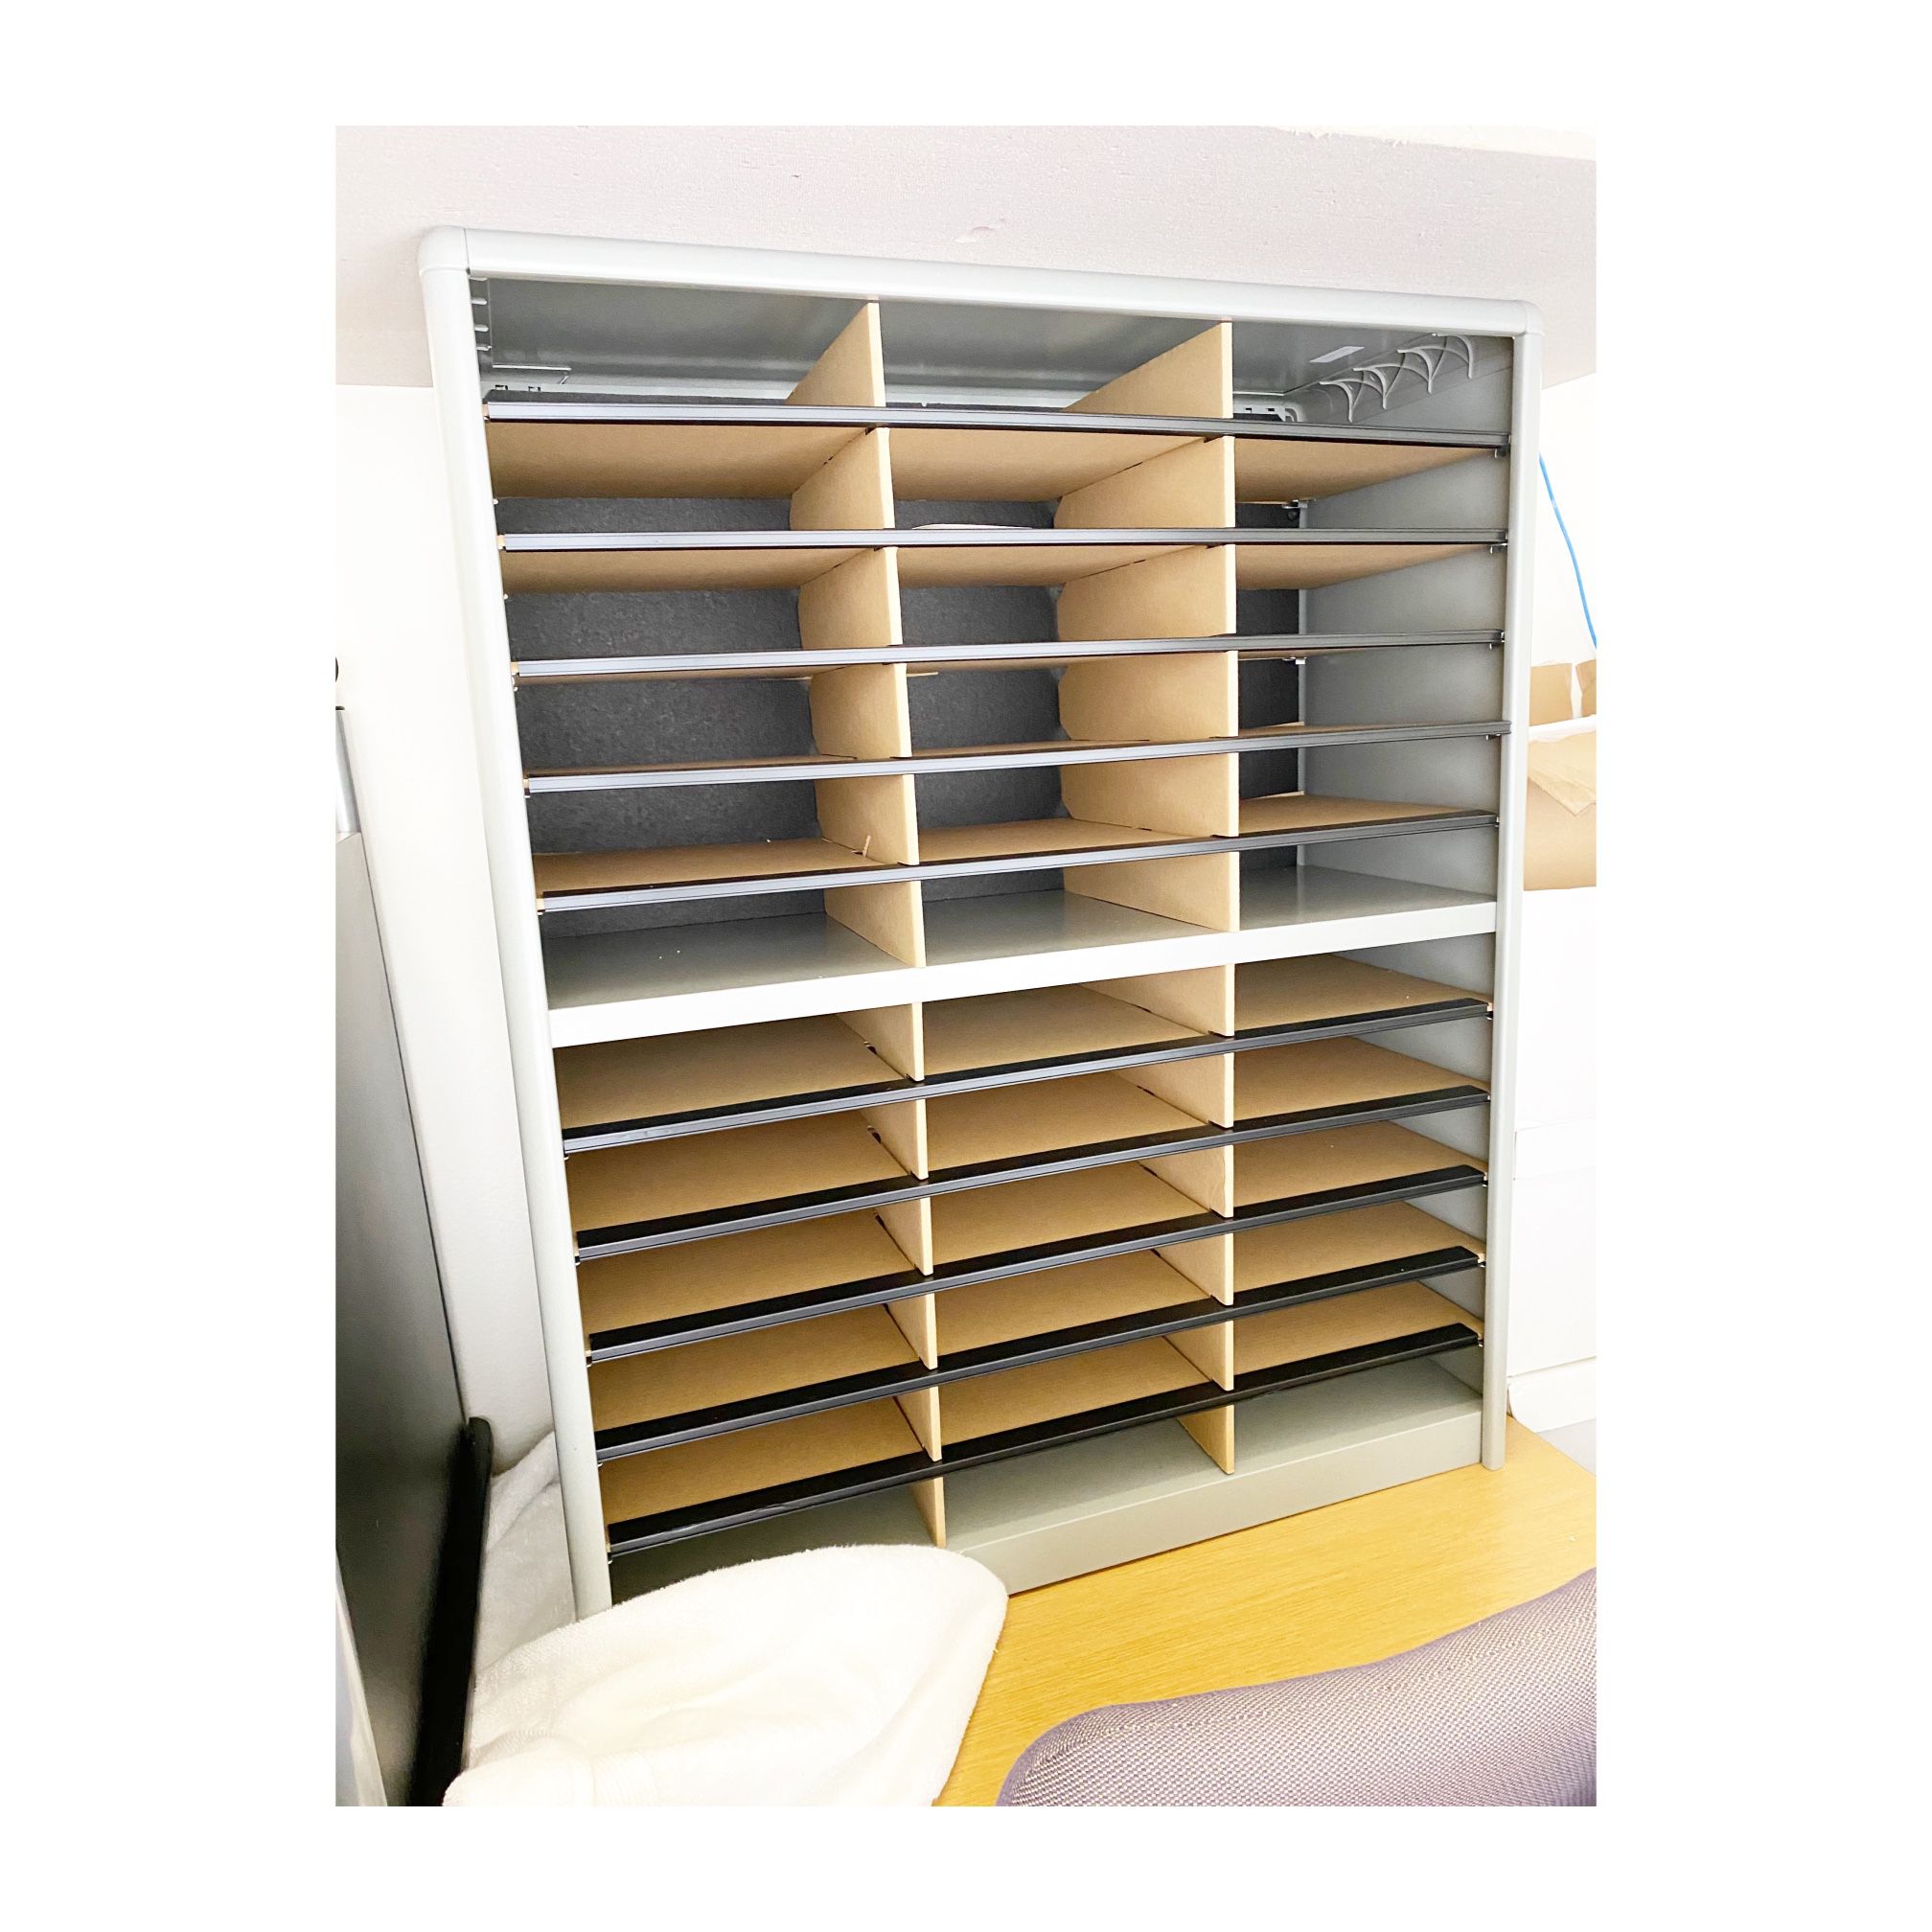 Literature Organizer or Mail Sorter (never Used)